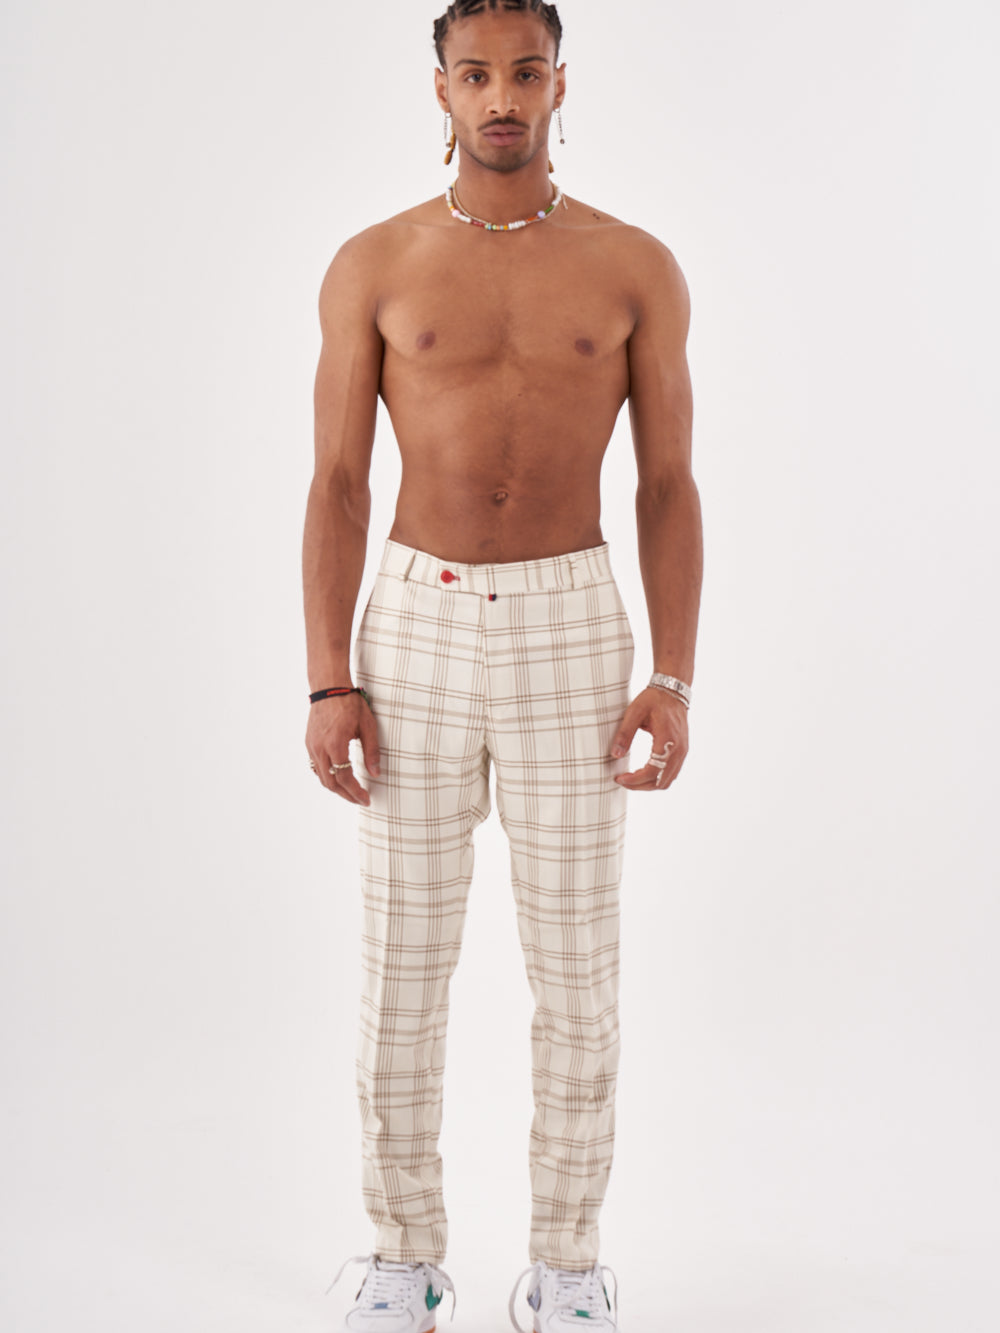 The model is wearing FULLMOON PANTS.